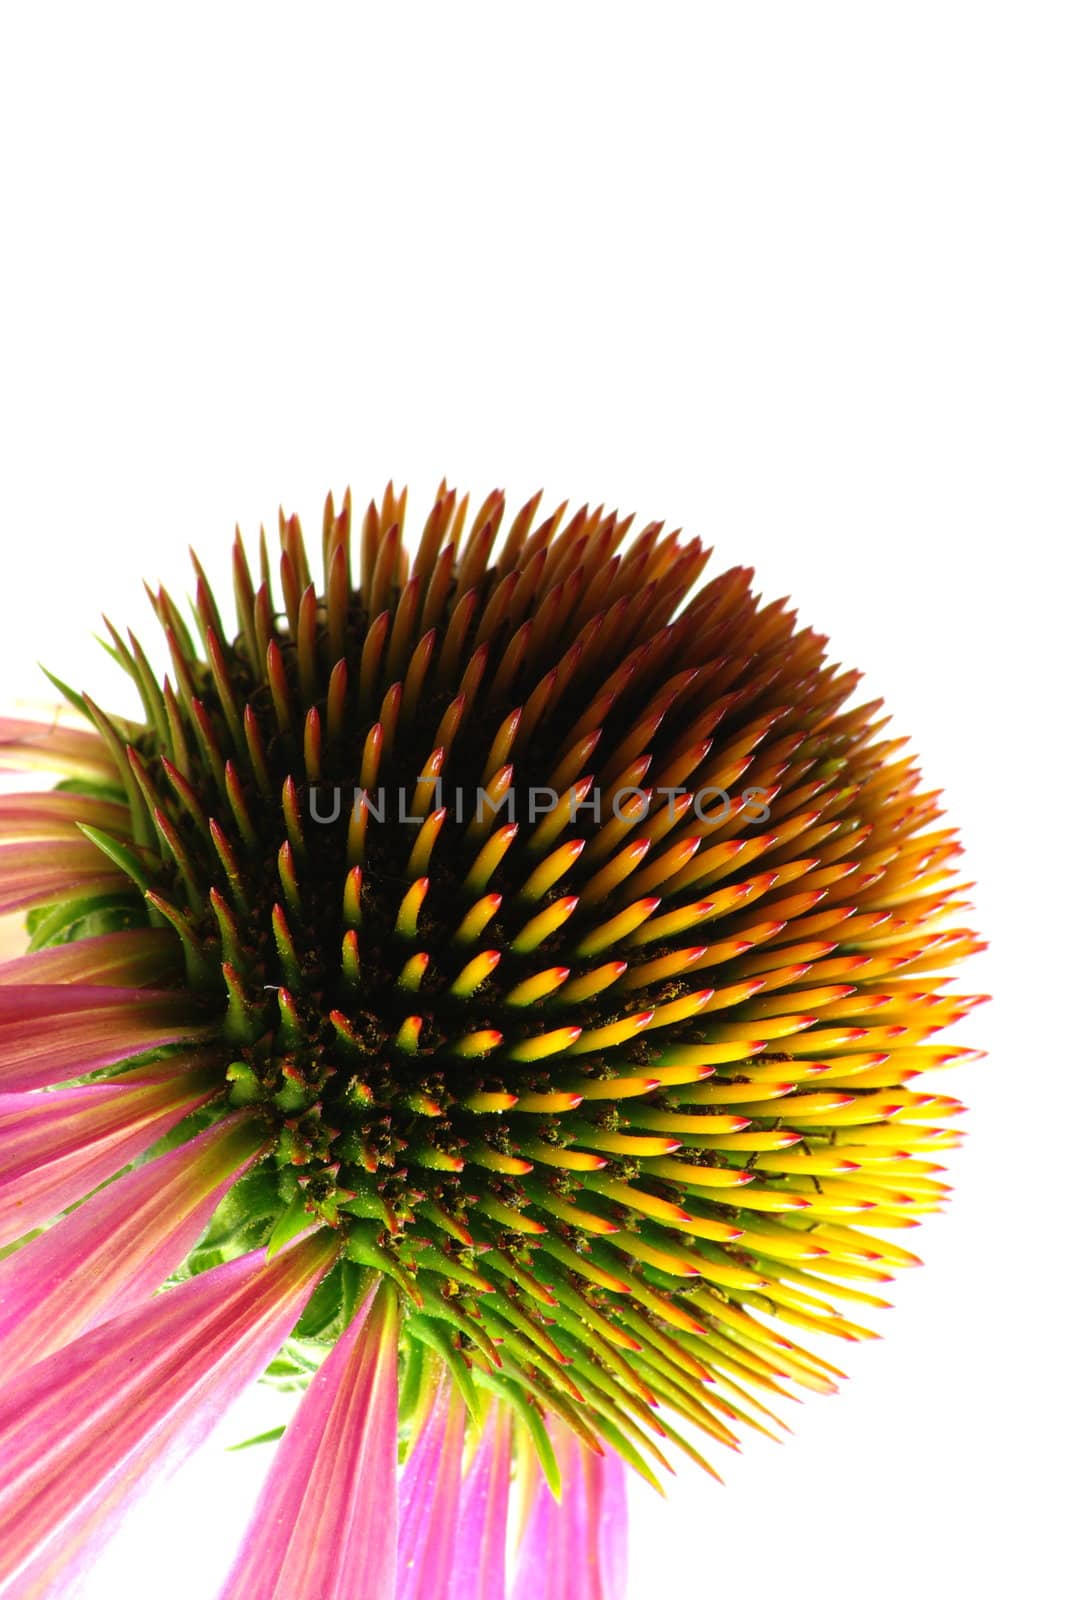 A macro of a Purple Coneflower showing the colorful immature seeds.